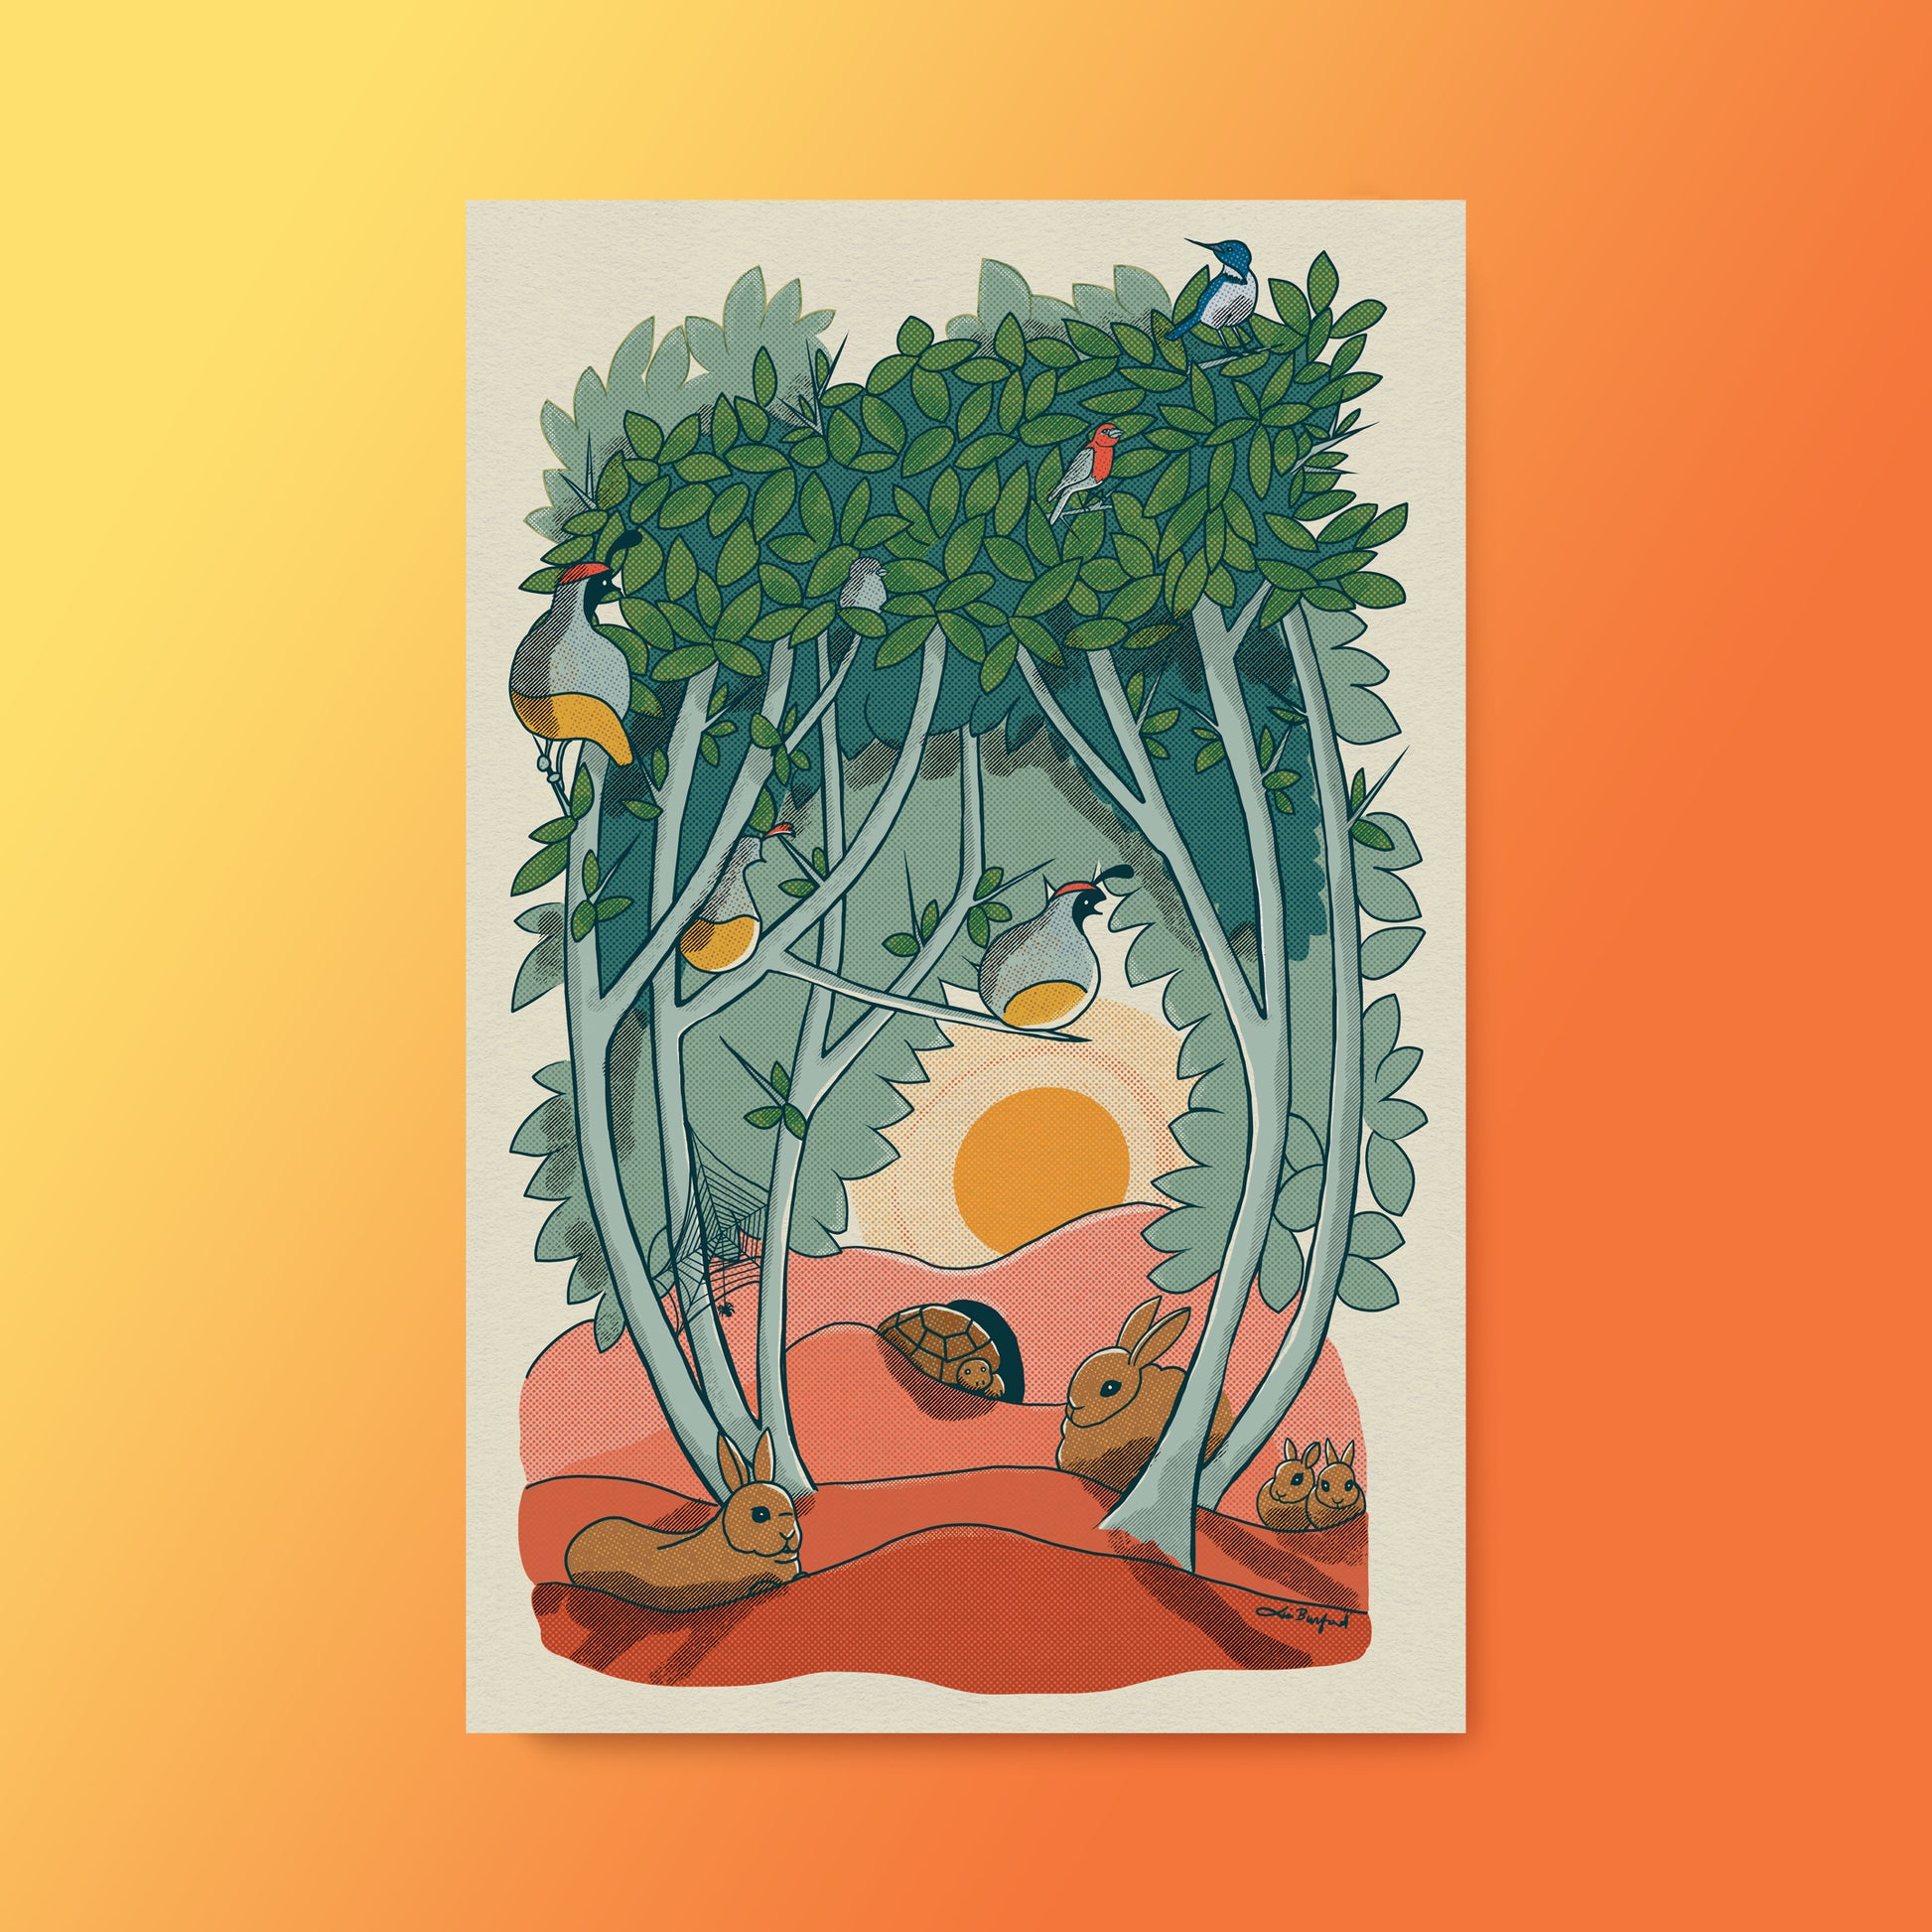 This 11"x17" print of animal characters found in a graythorn bush. Quail, cottontail bunnies, Western scrub jay, house finches, and a desert tortoise all hang out inside and underneath the branches of this bush. A sun can be seen setting in the background through an opening in the branches. The print rests on a separate yellow to orange gradient background.